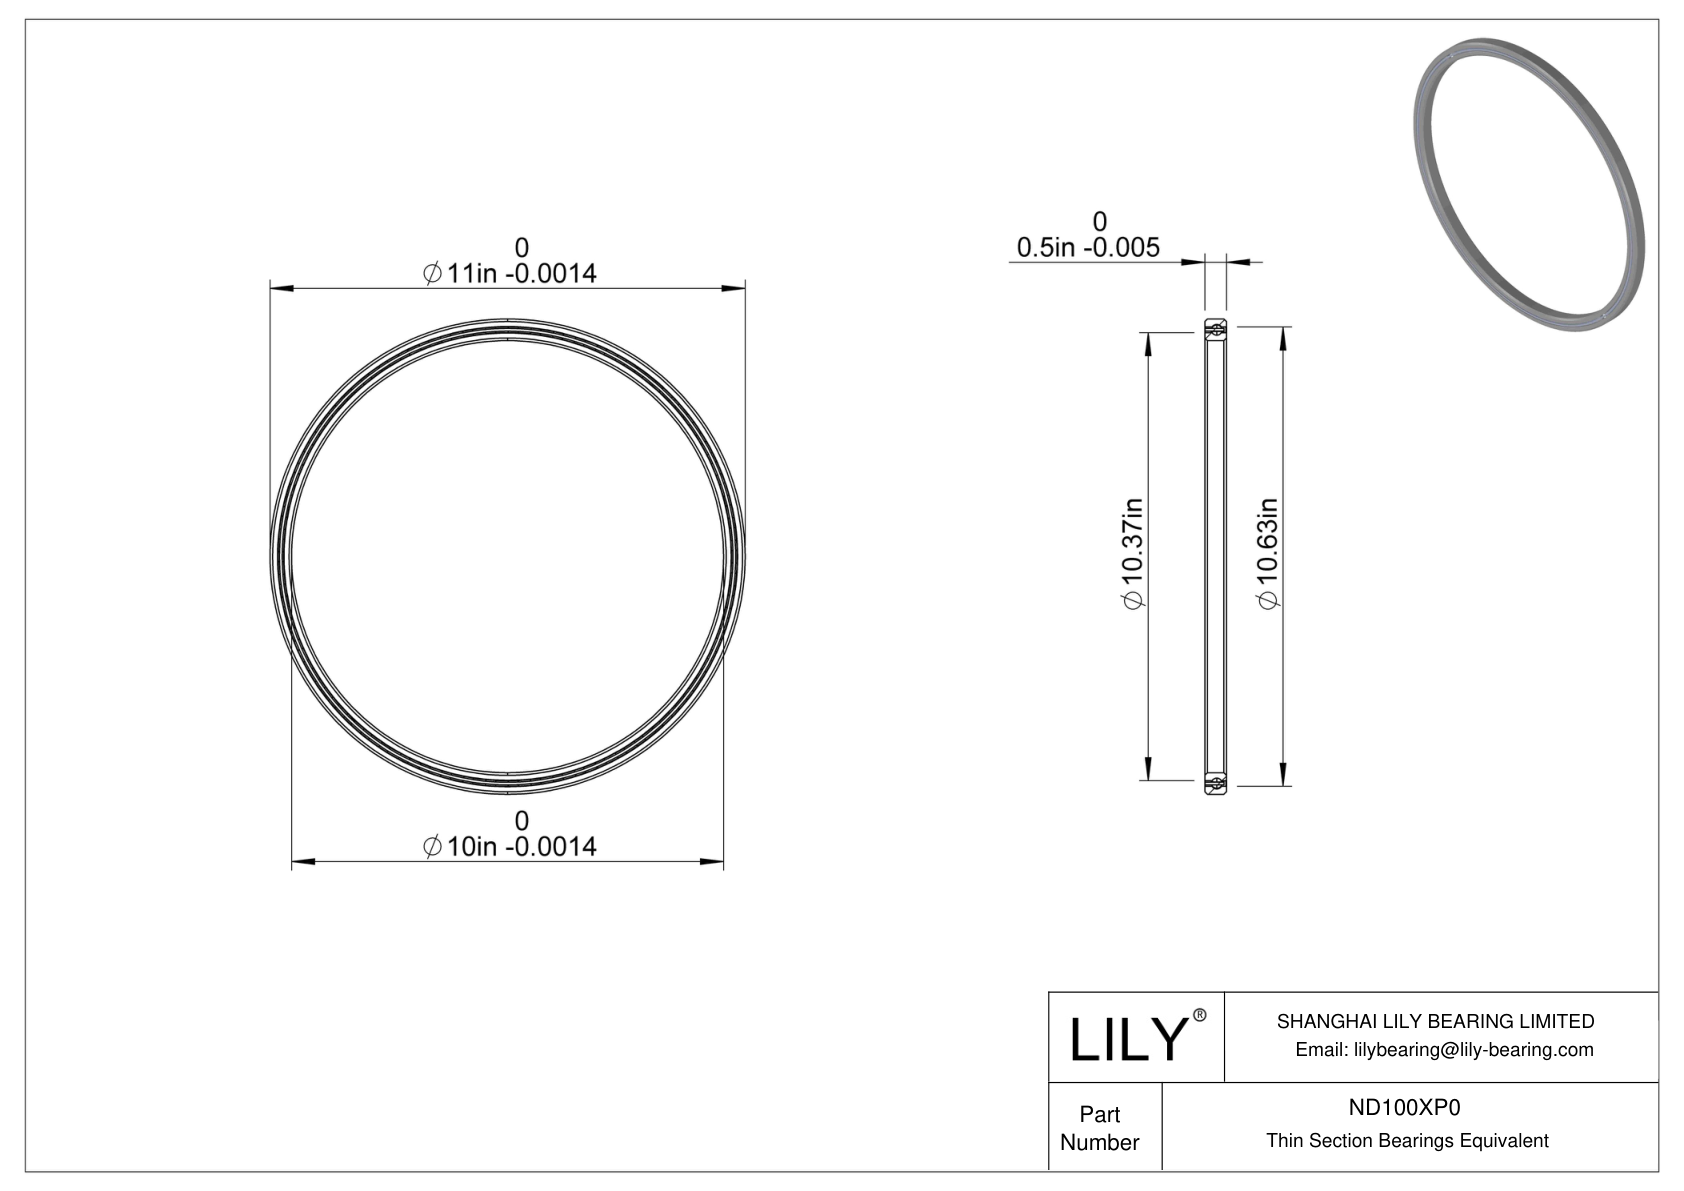 ND100XP0 Constant Section (CS) Bearings cad drawing